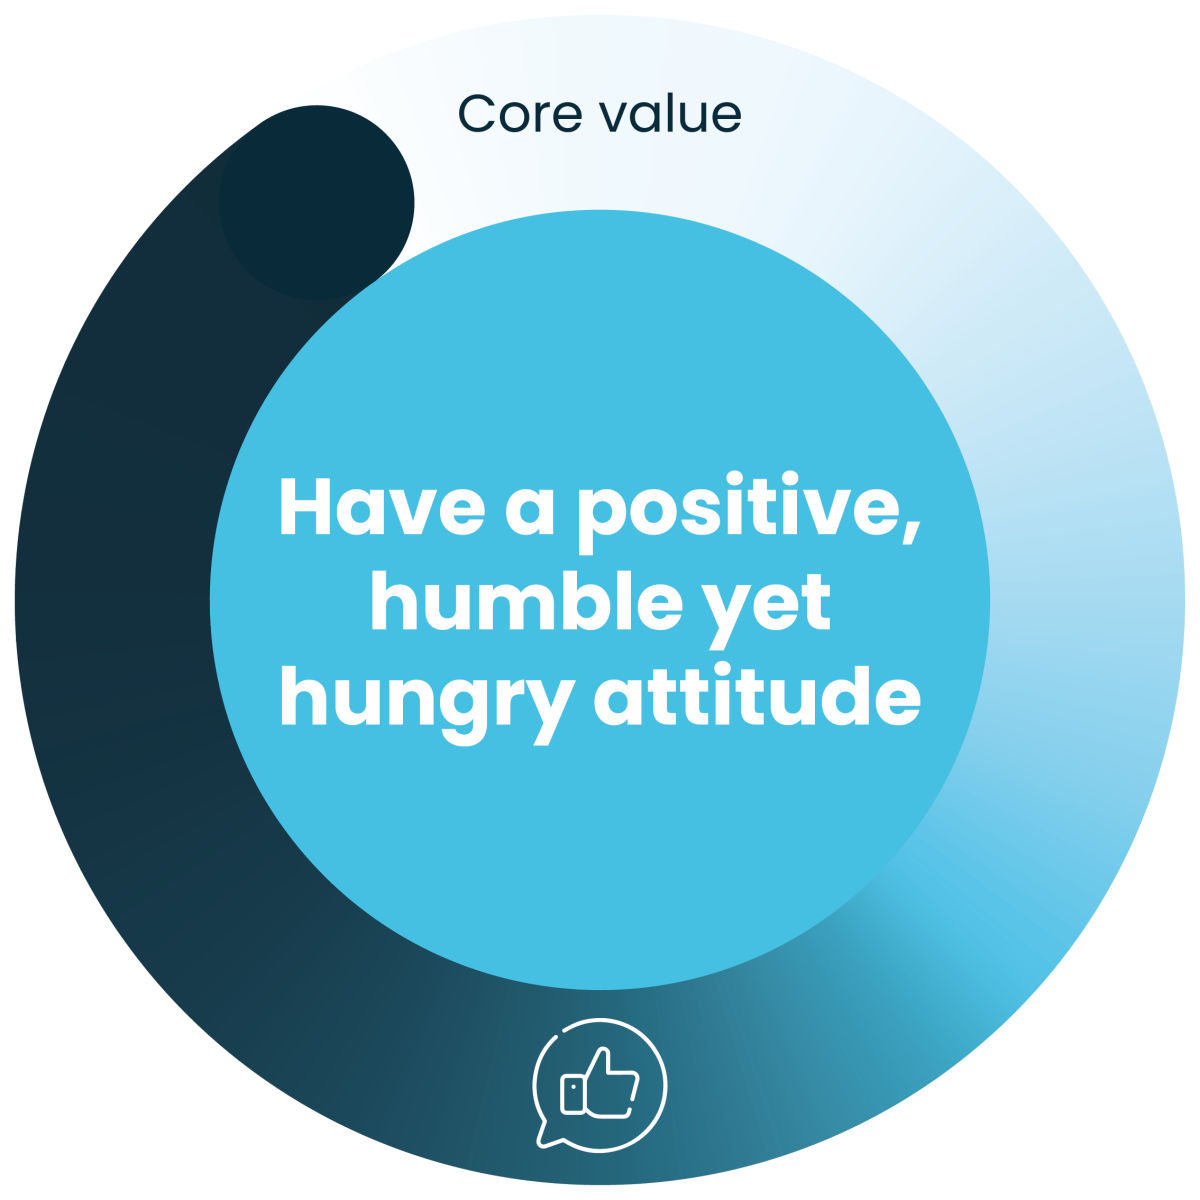 Have a positive, humble yet hungry attitude